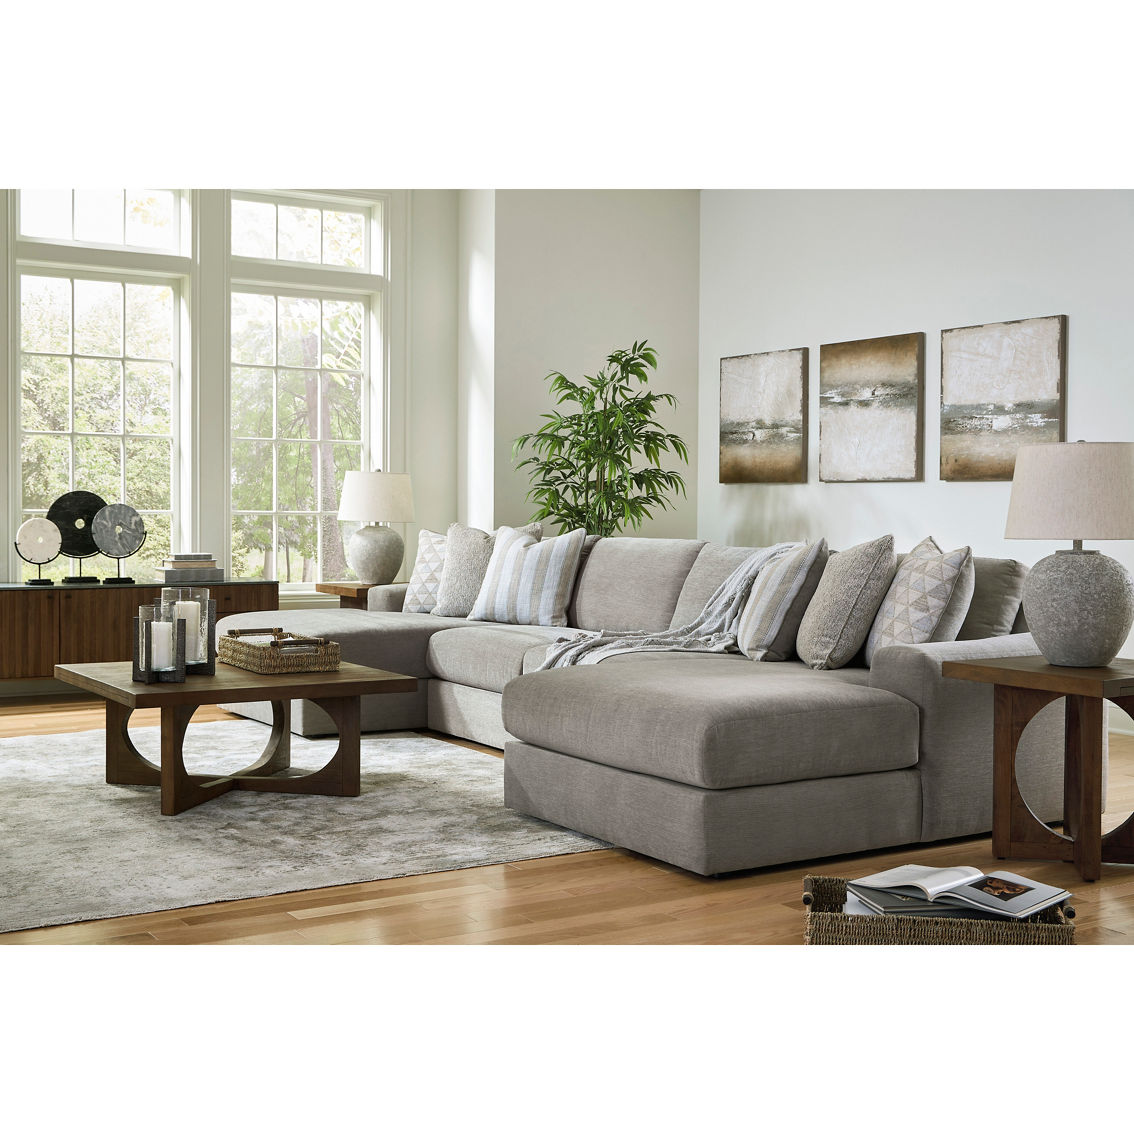 Millennium by Ashley Avaliyah Double Chaise Sectional 4 pc. - Image 2 of 2